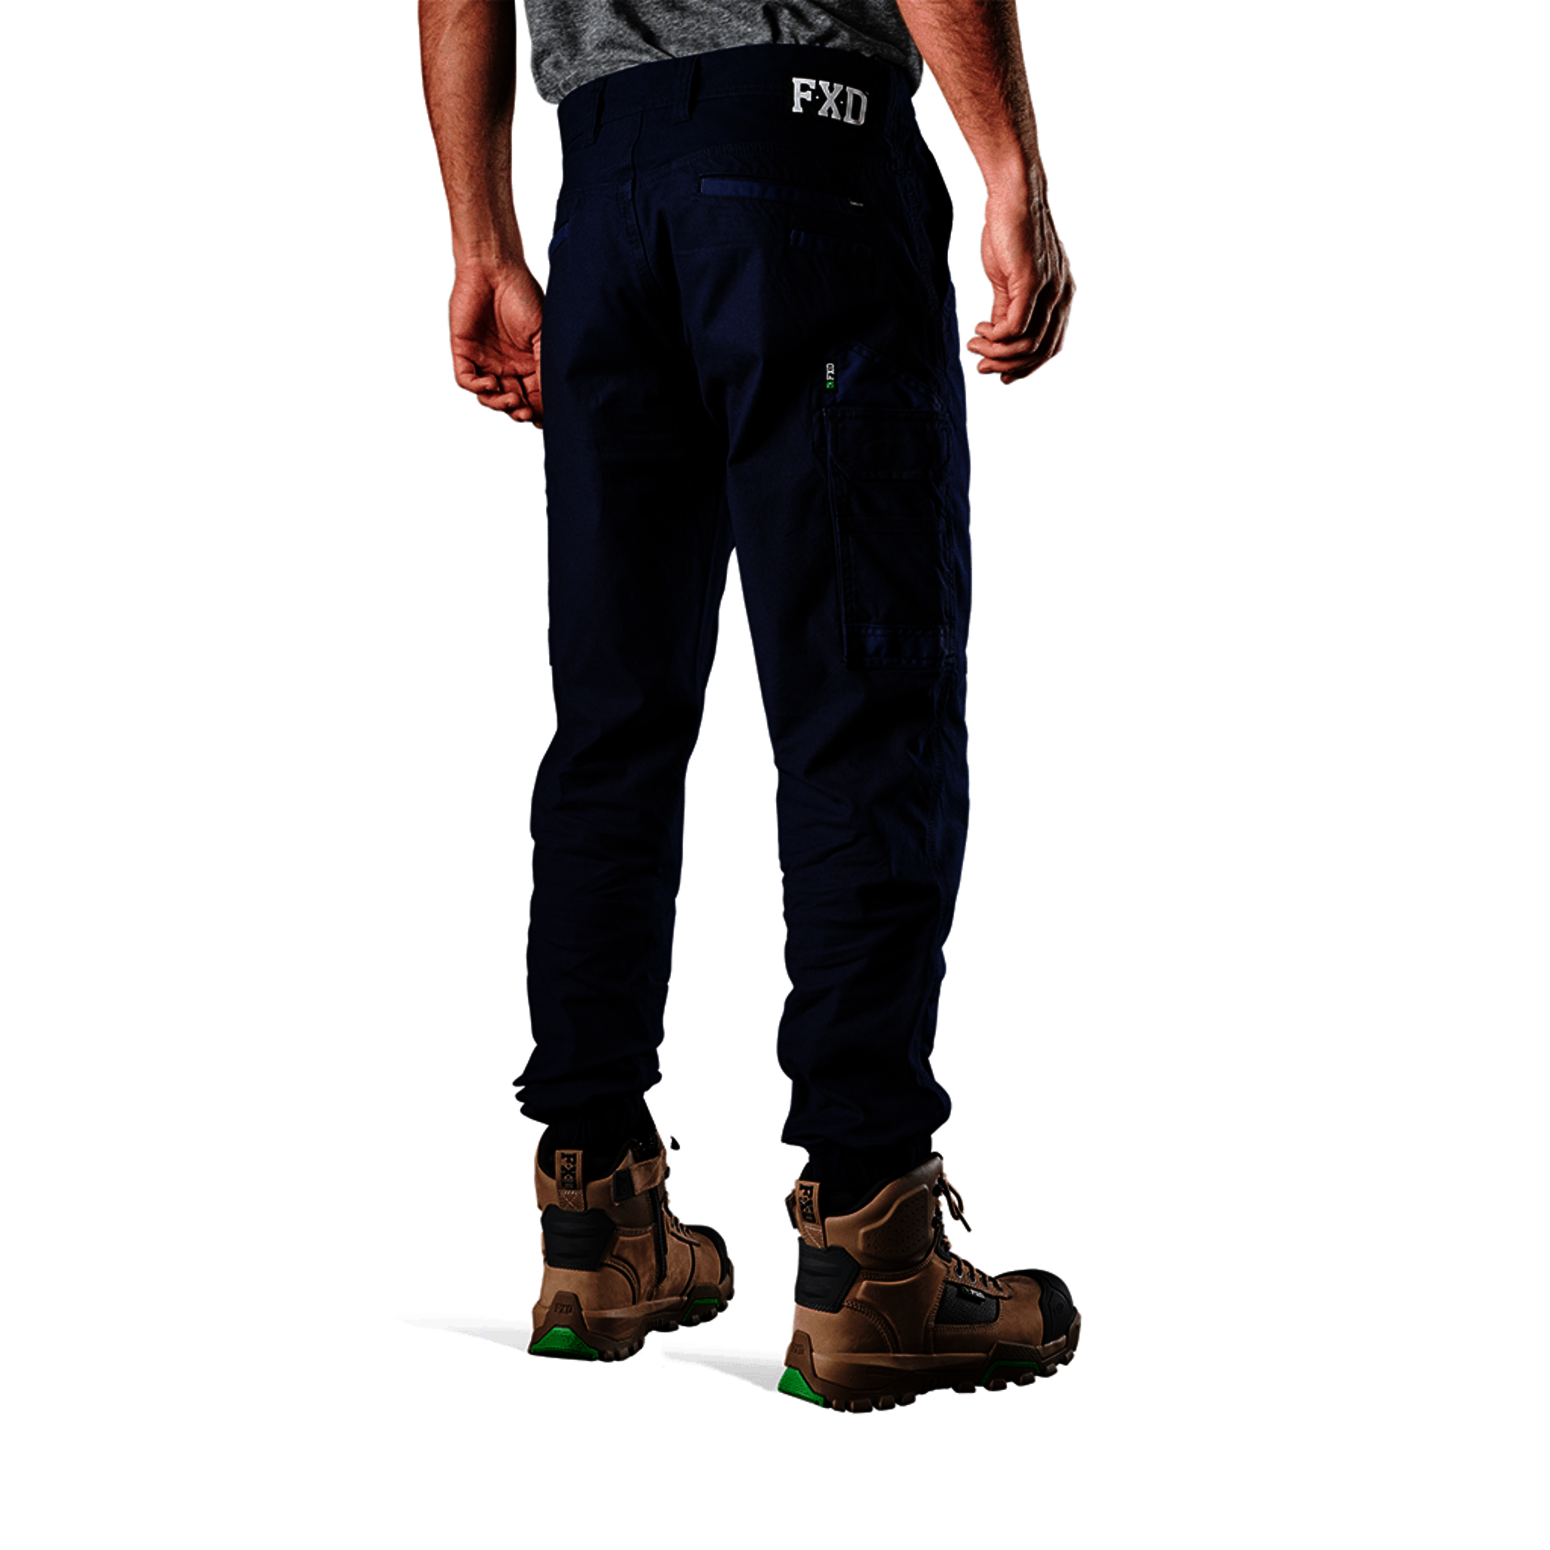 FXD WP-4 Work Pant - Navy